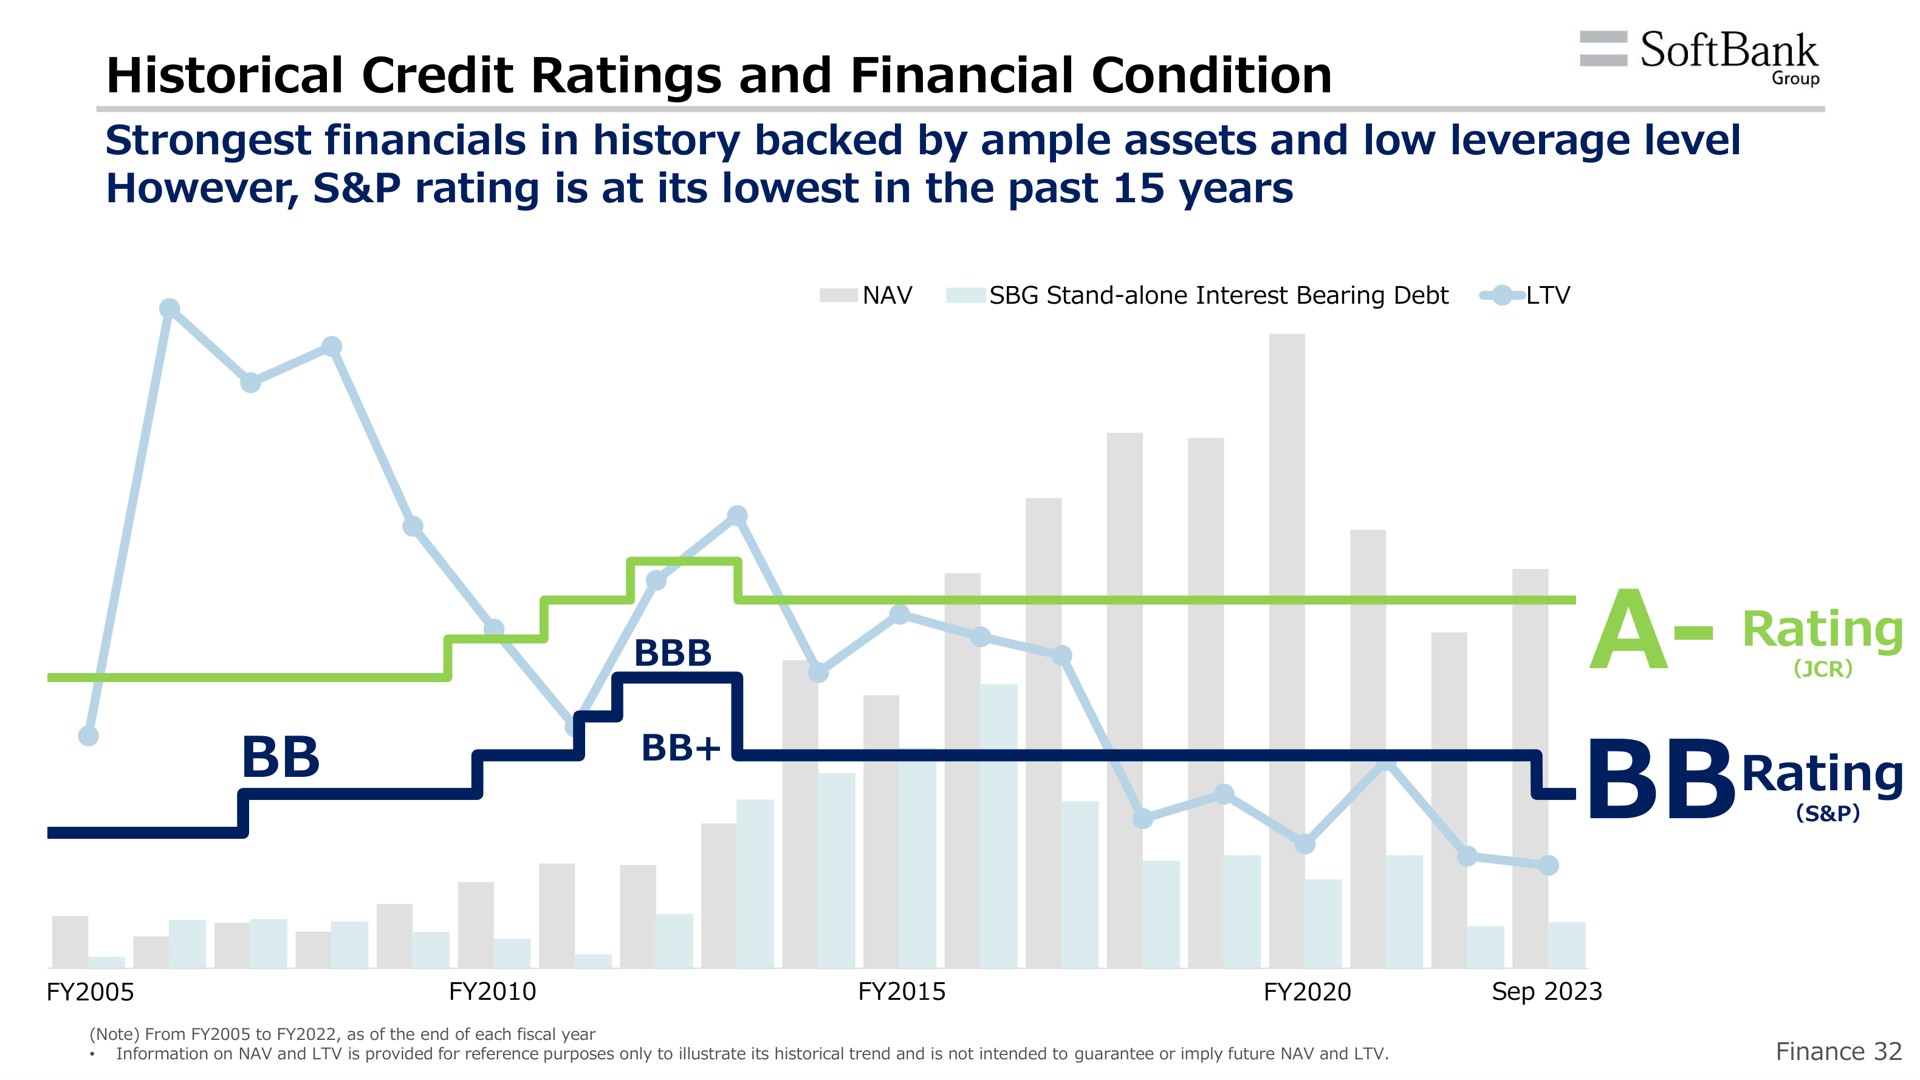 historical credit ratings and financial condition a rating rating | SoftBank